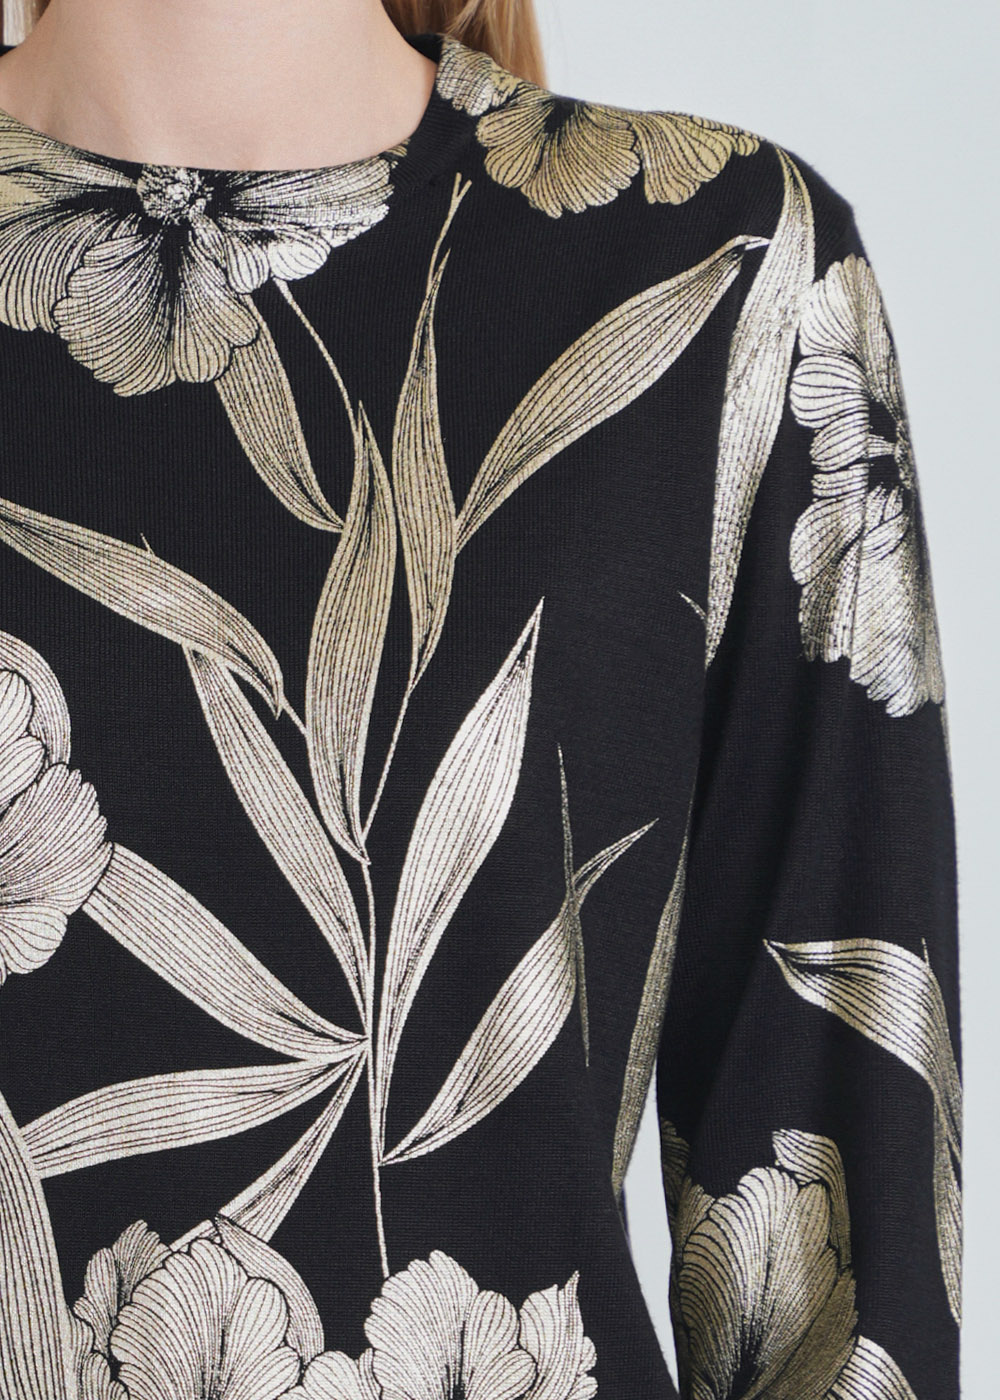 Timeless Beauty: Black Knit with Golden Floral Impressions